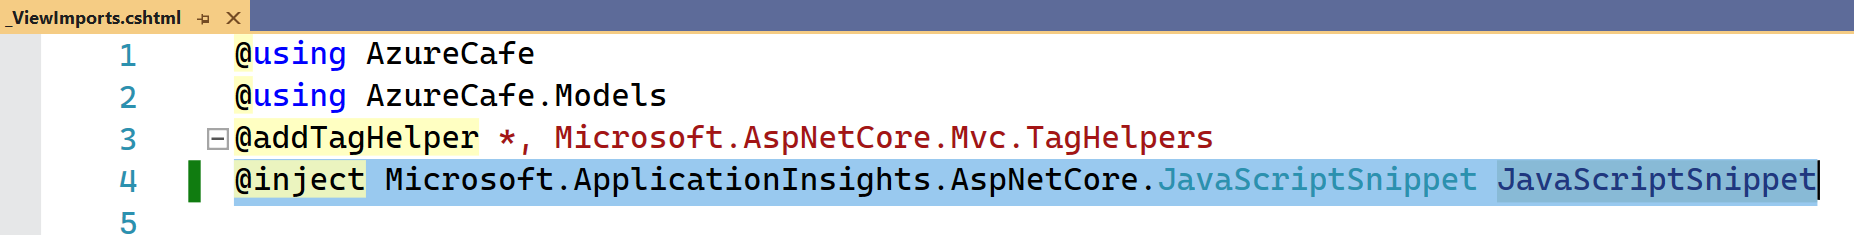 Screenshot of the _ViewImports.cshtml file in Visual Studio with the preceding line of code highlighted.